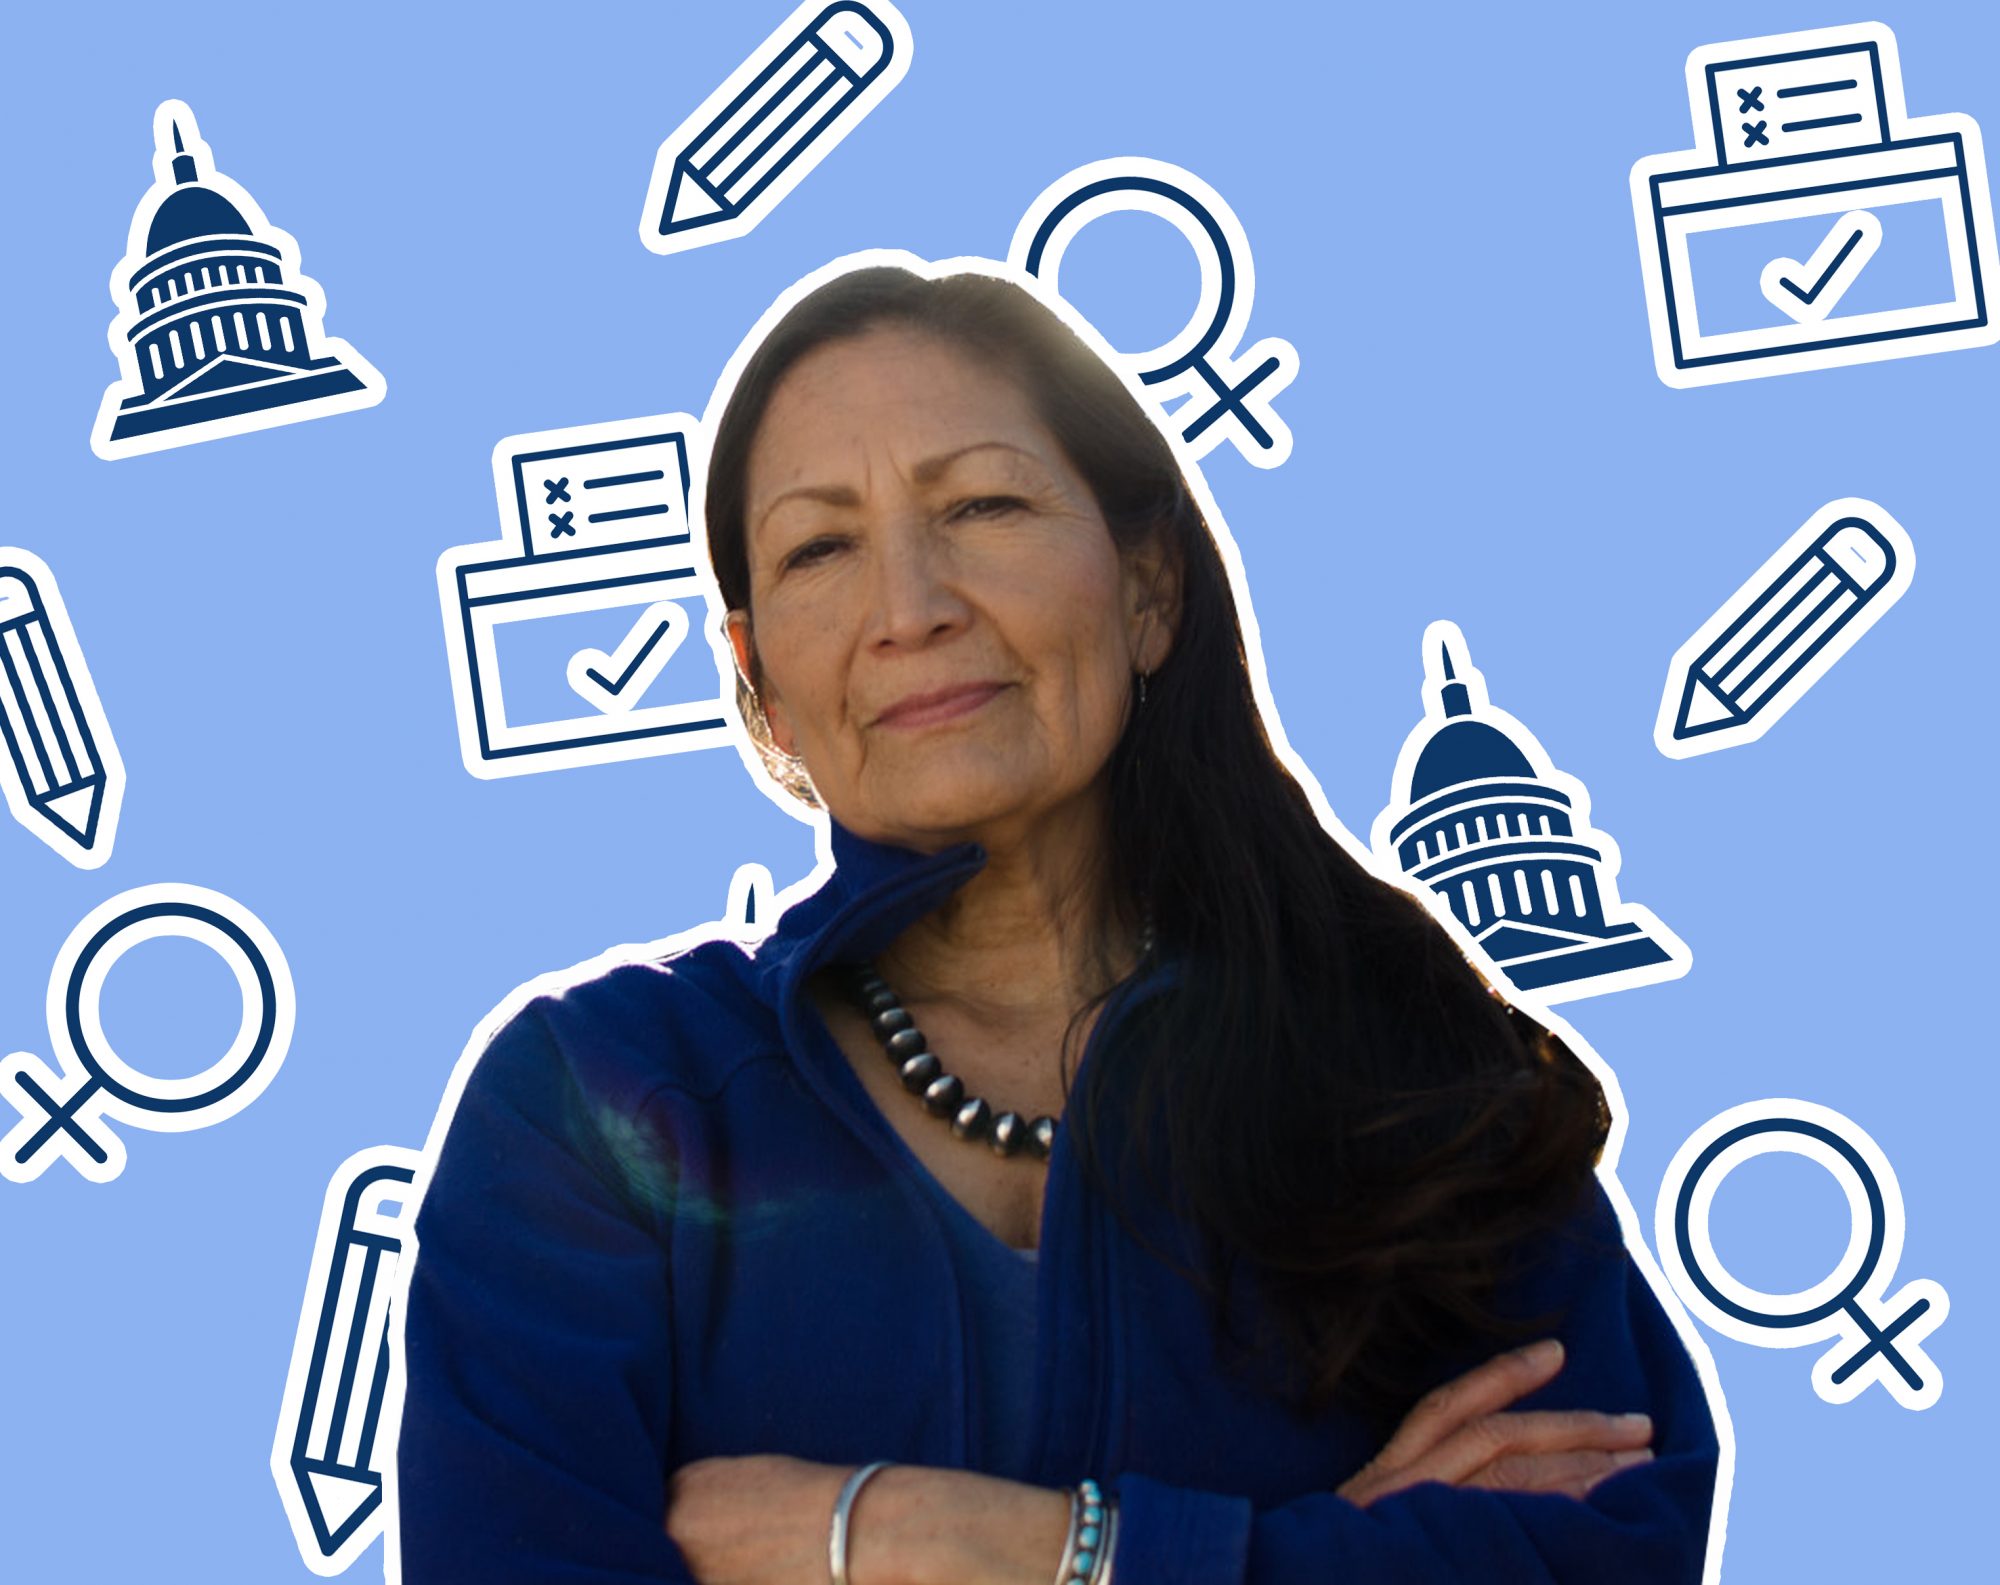 Deb Haaland could become the first Native American woman in Congress, and she wants to make sure everyone has an equal shot at success image